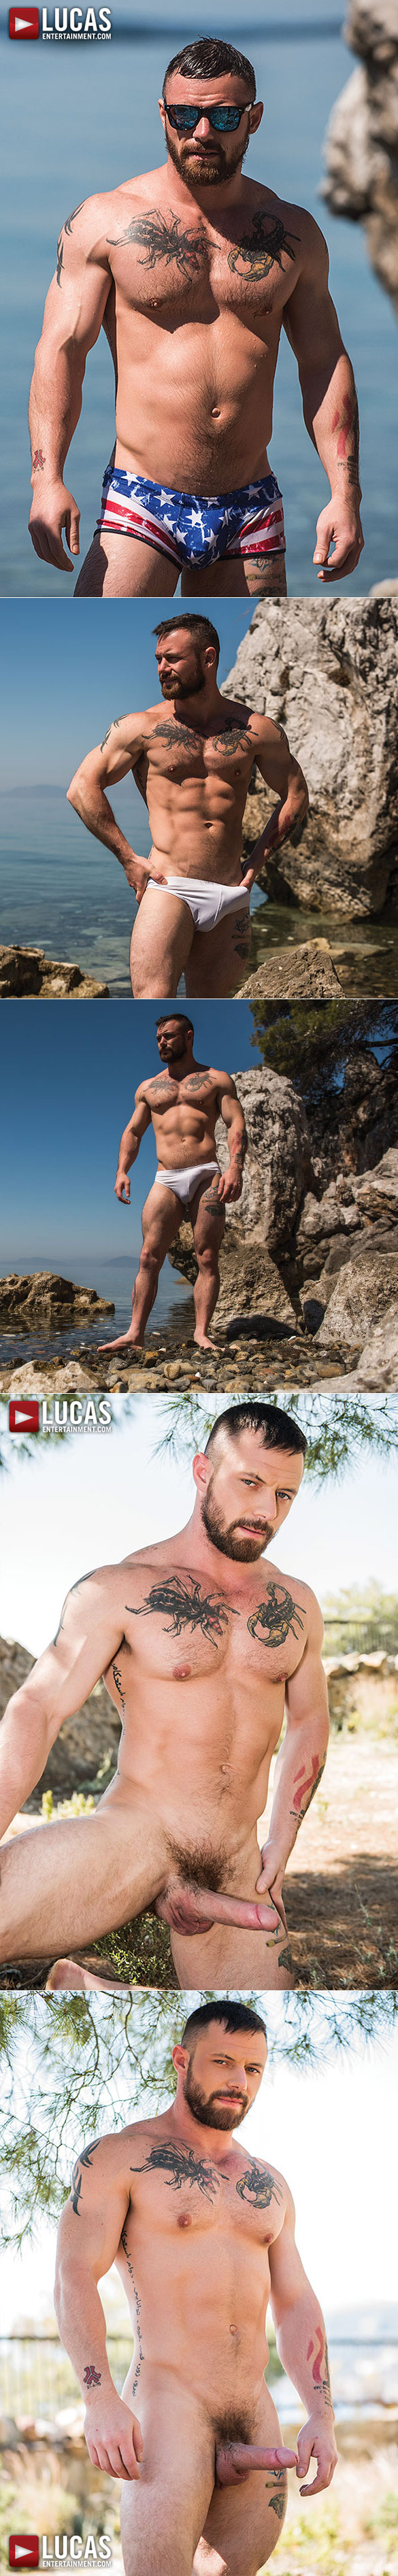 Lucas Entertainment: Newcomer Josh Rider gets fucked by Sergeant Miles in "Bareback Auditions 04: Raw Recruits"